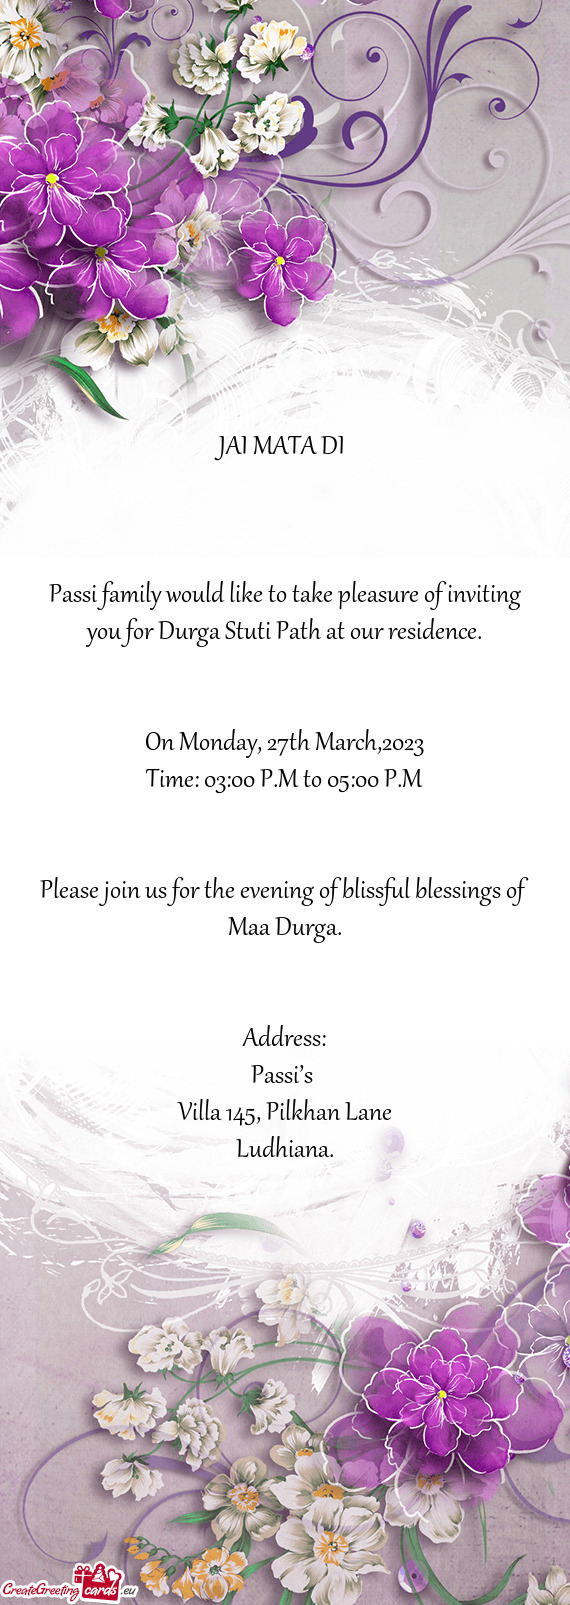 Passi family would like to take pleasure of inviting you for Durga Stuti Path at our residence